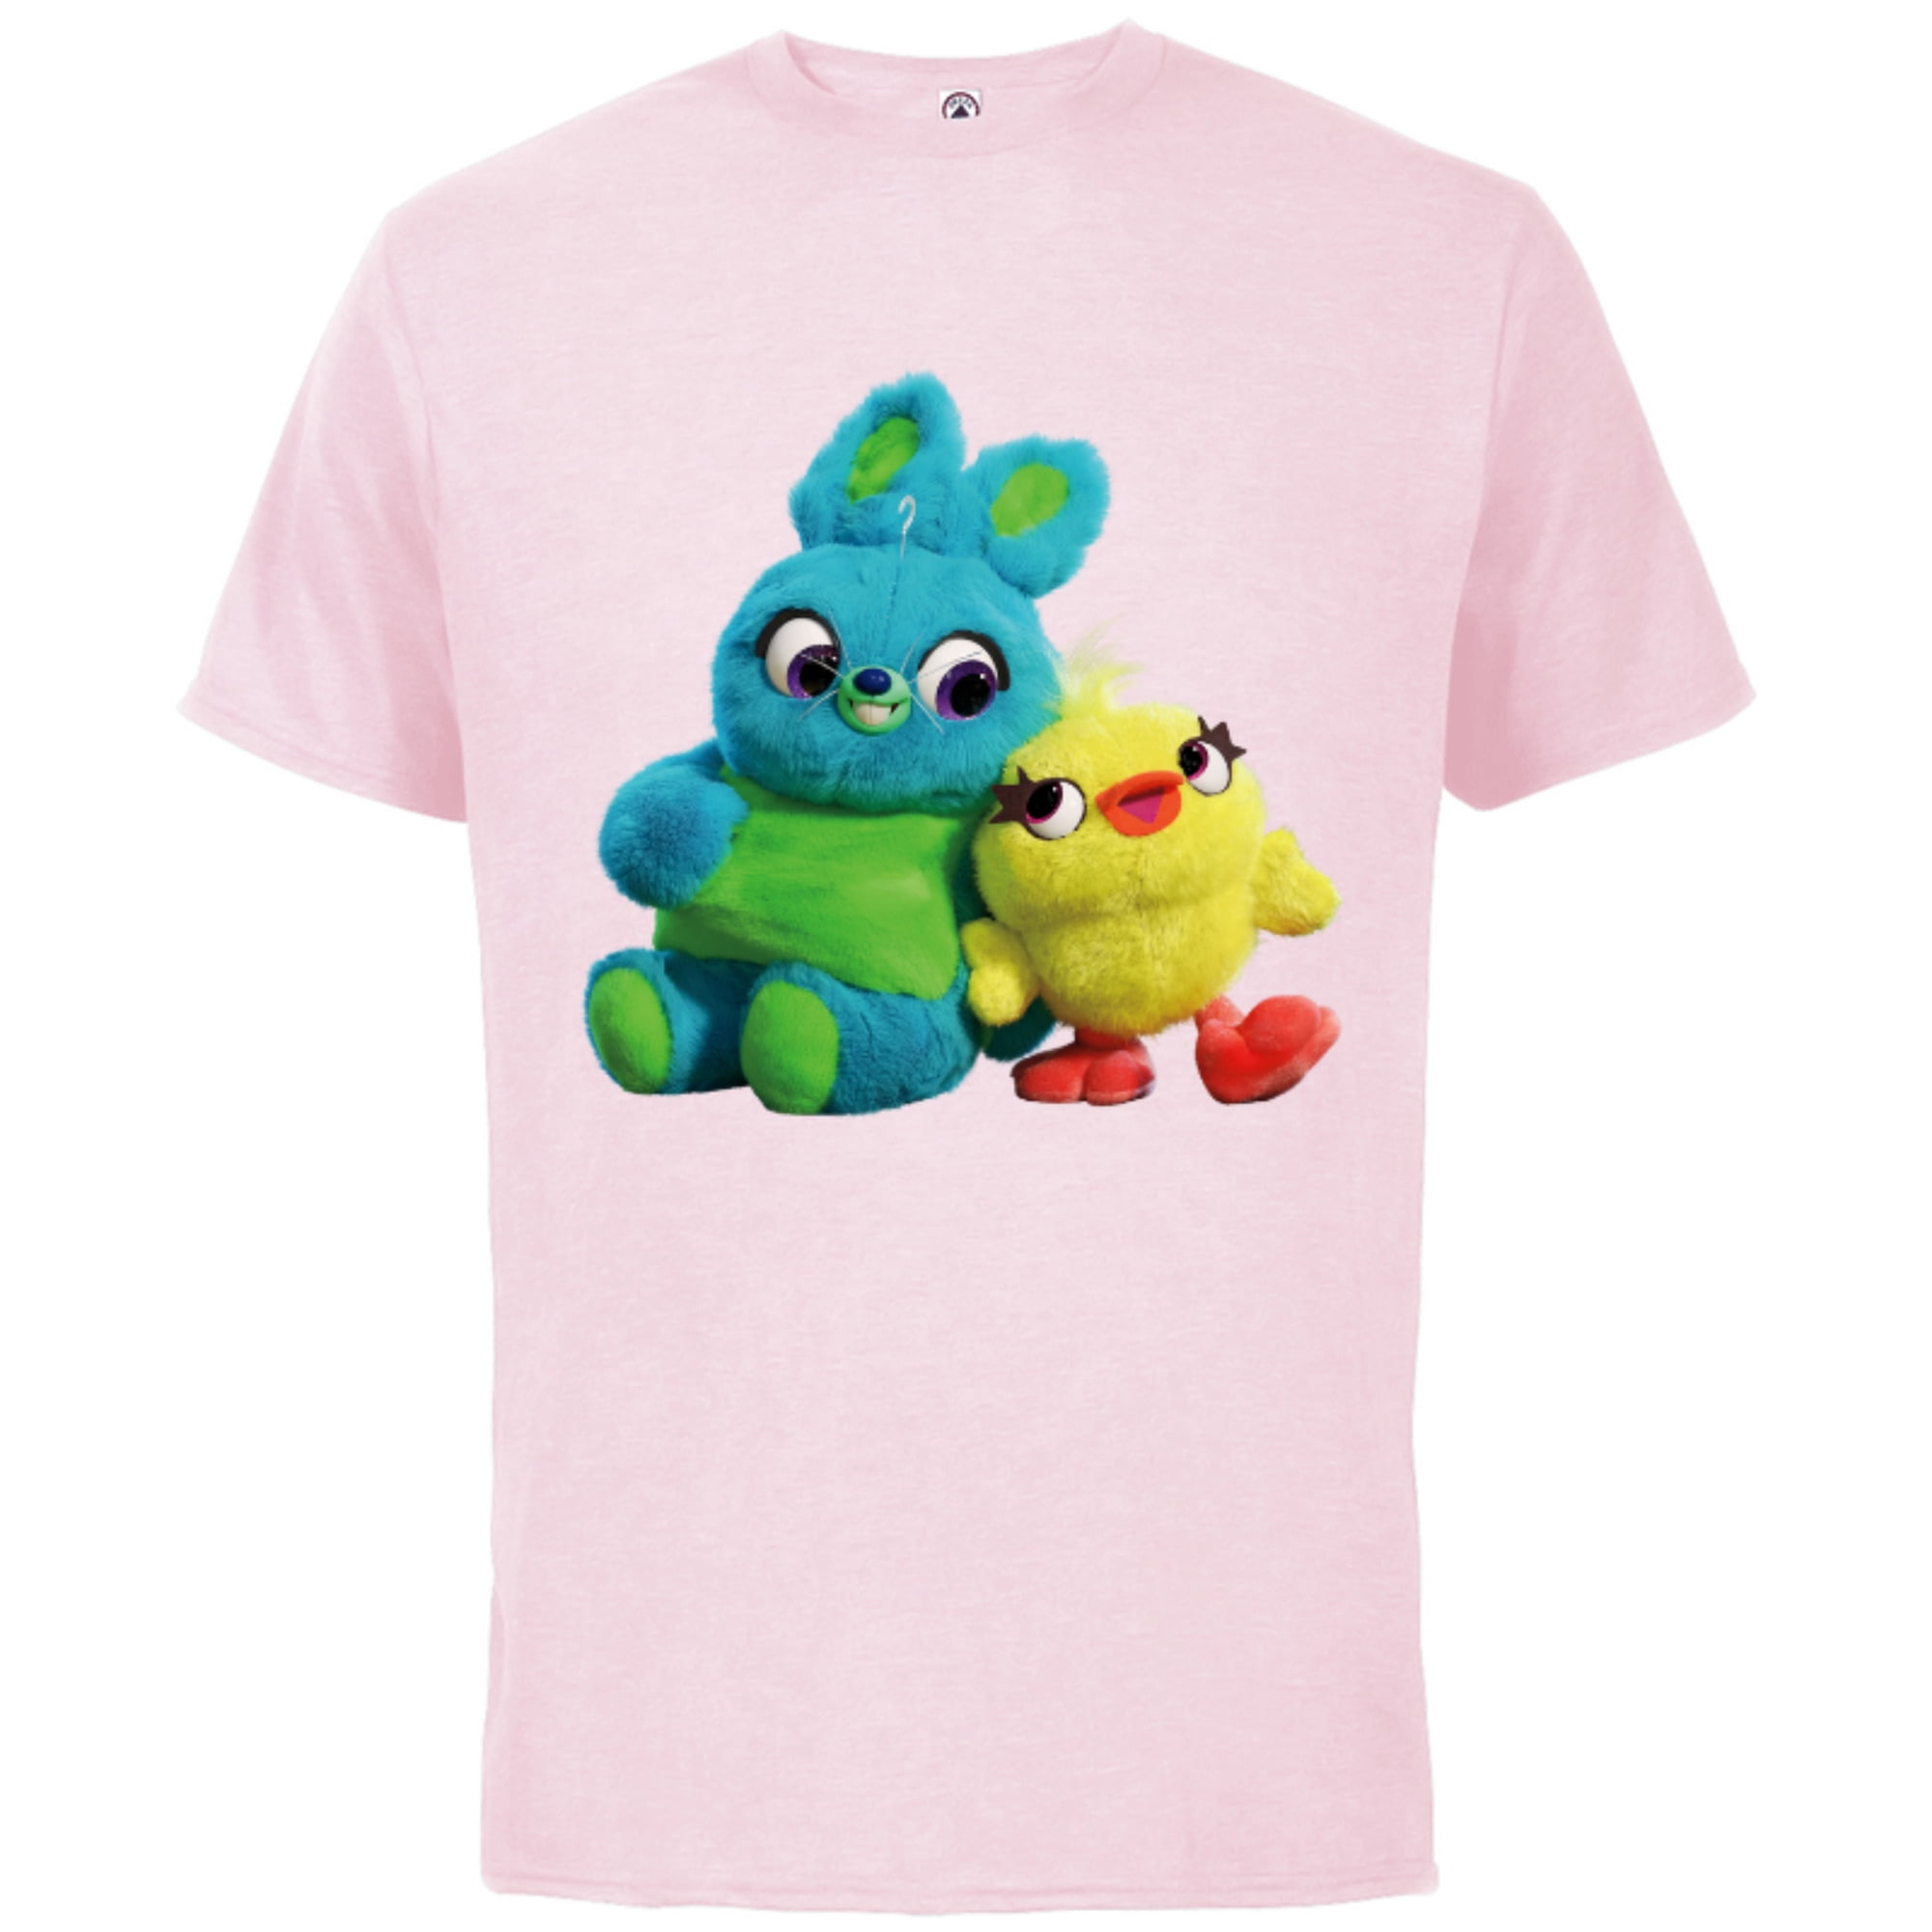 Disney Pixar Toy Story 4 Ducky and Bunny Plush Pals T-Shirt - Short Sleeve  Cotton T-Shirt for Adults - Customized-Putty